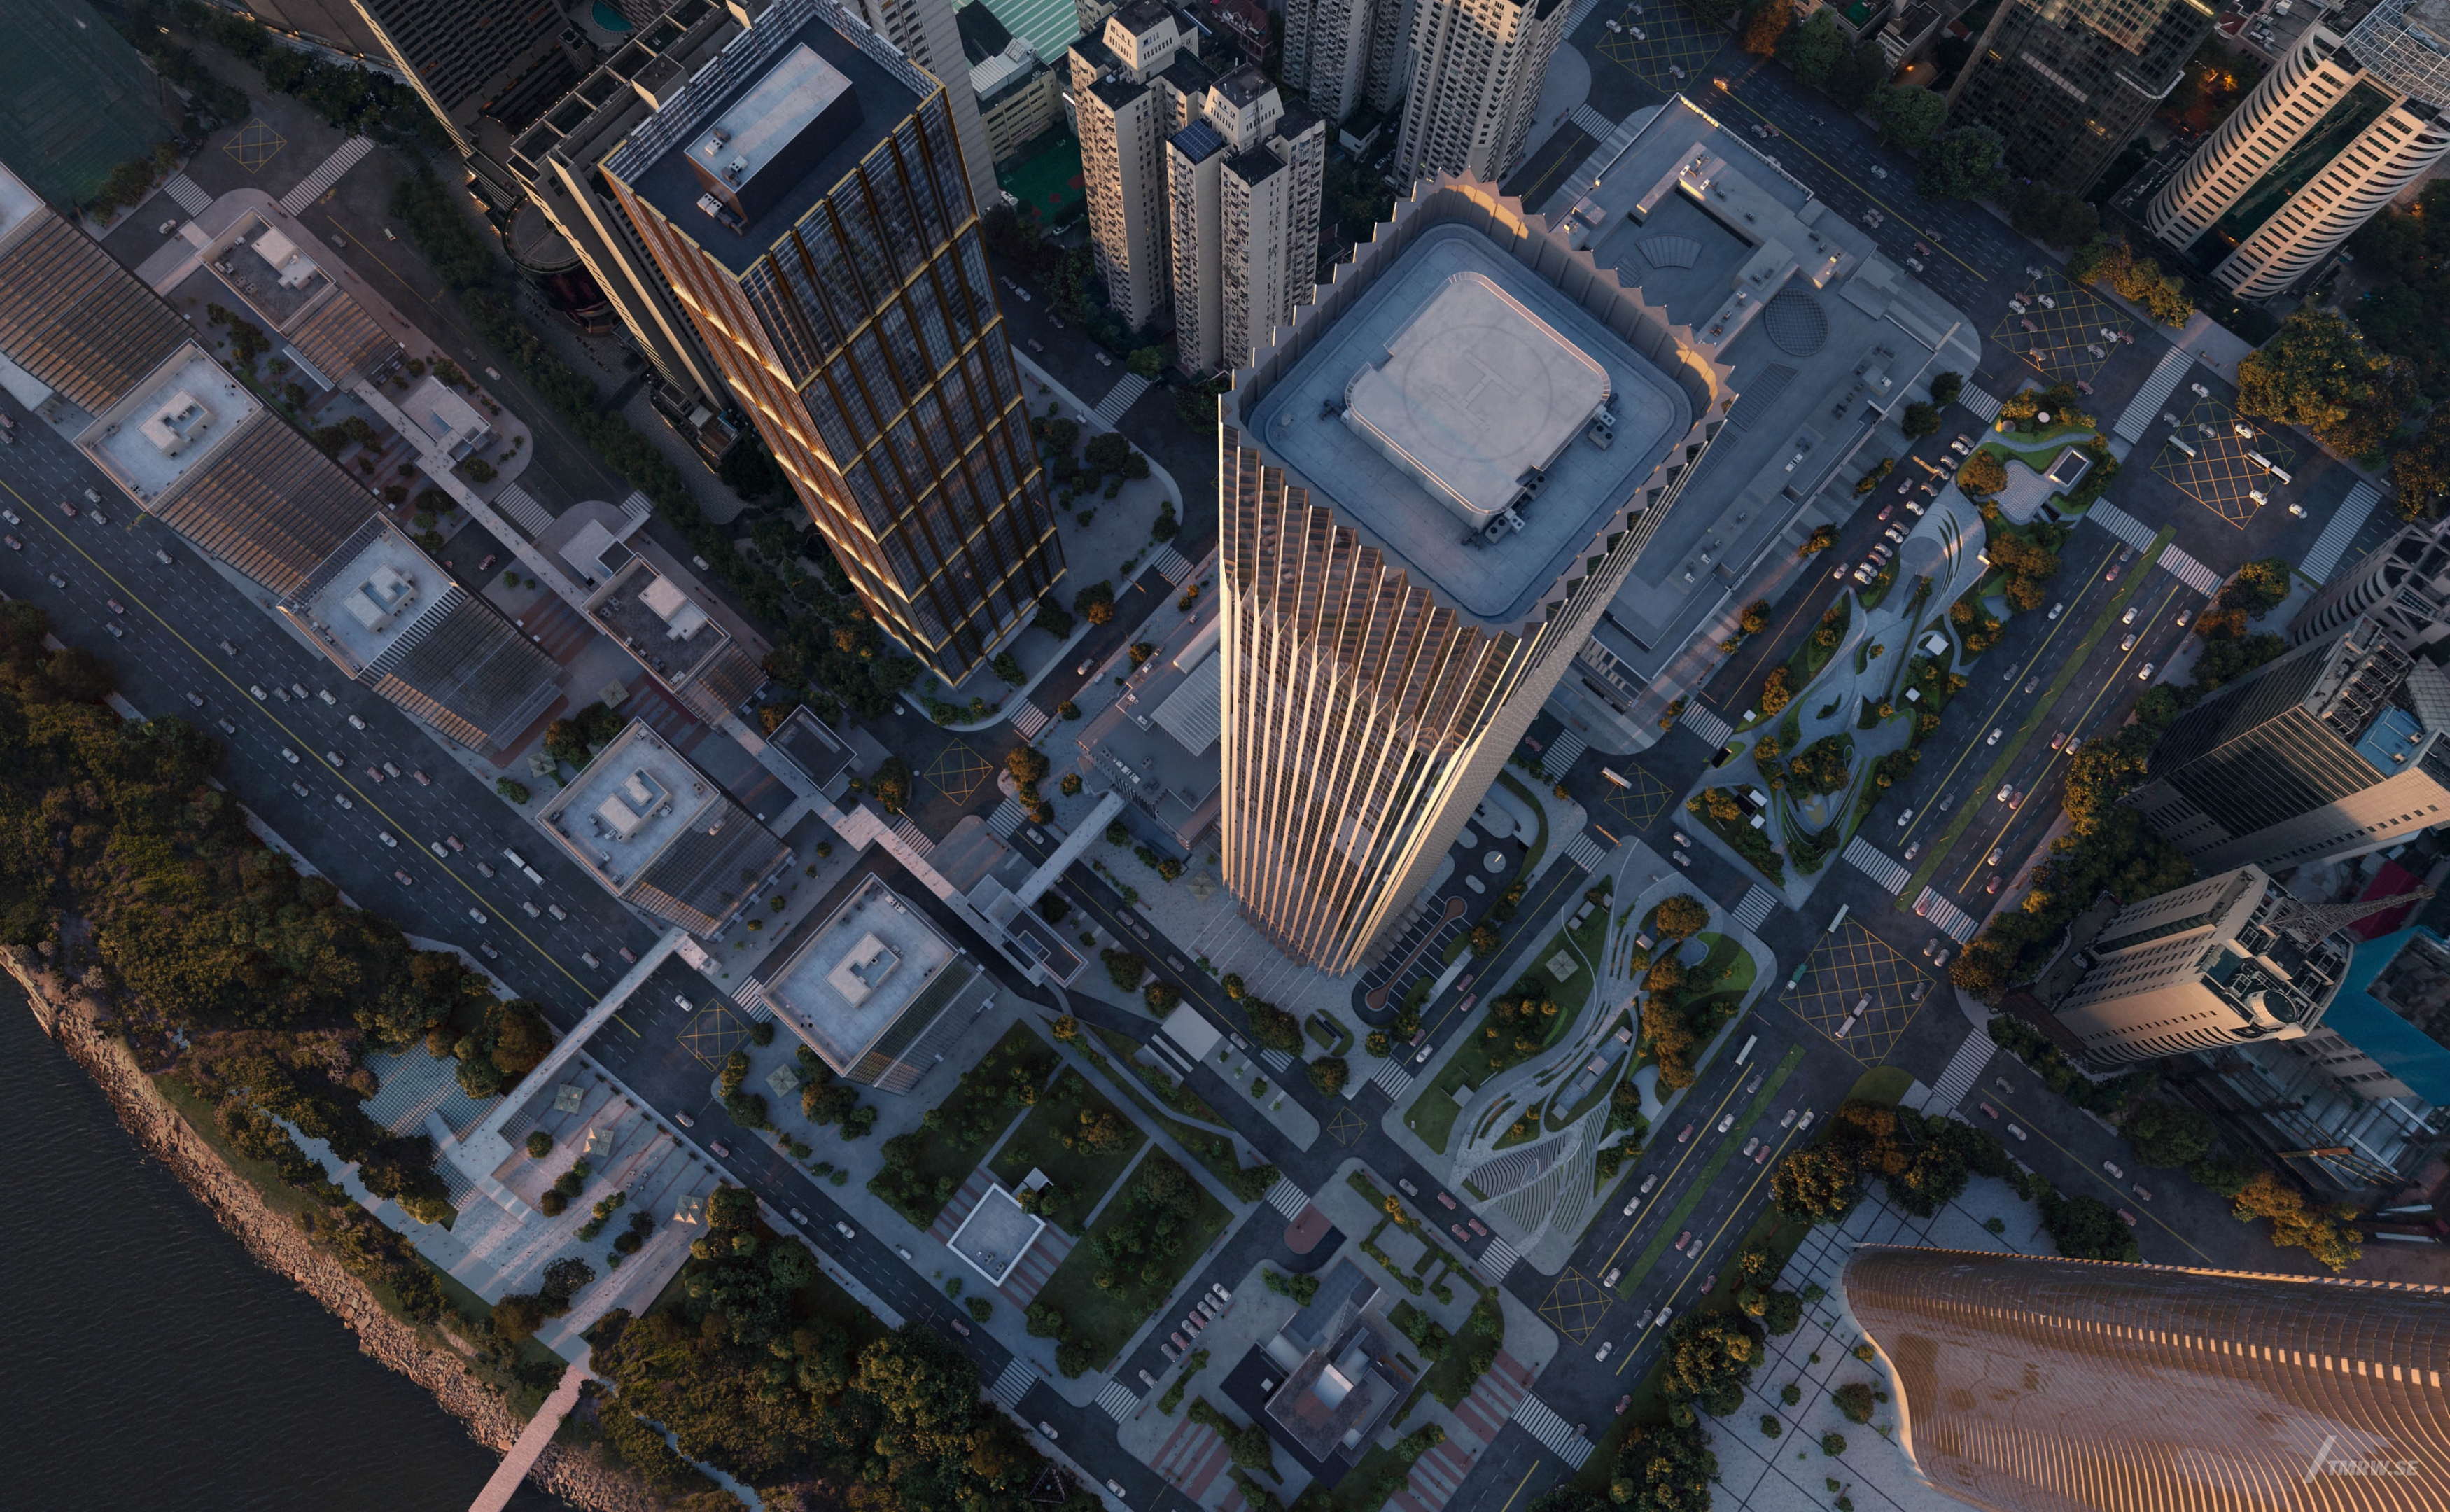 Architectural visualization of CFL for KPF, an skyscraper during day light from an aerial view looking down.